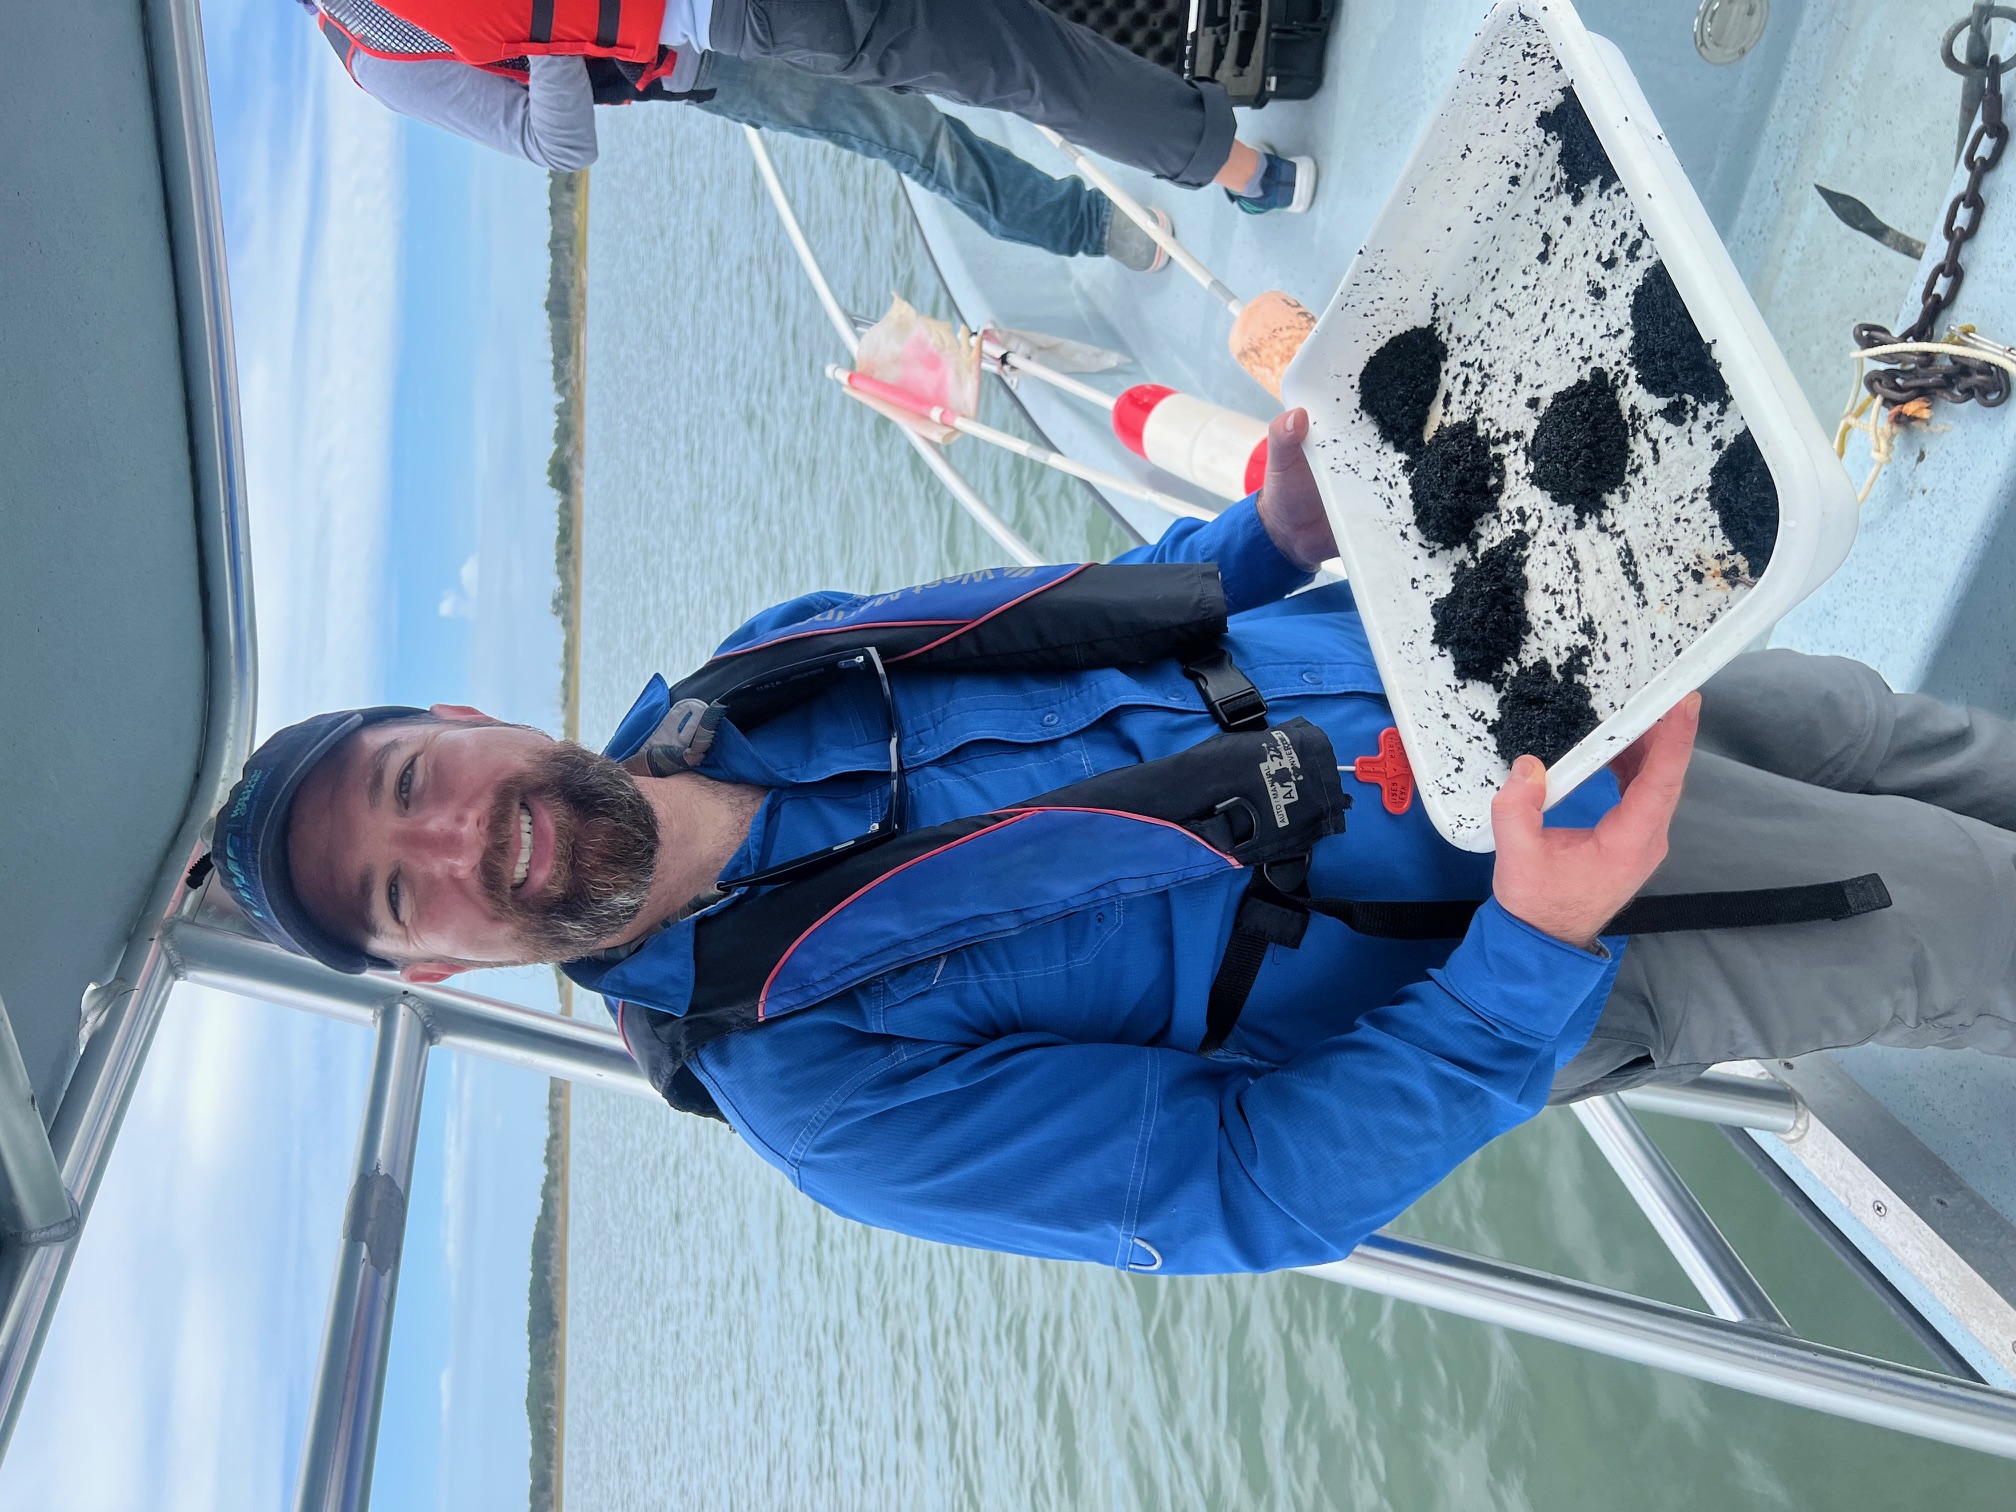 A person smiles holding a tray of dirt while on a boat.